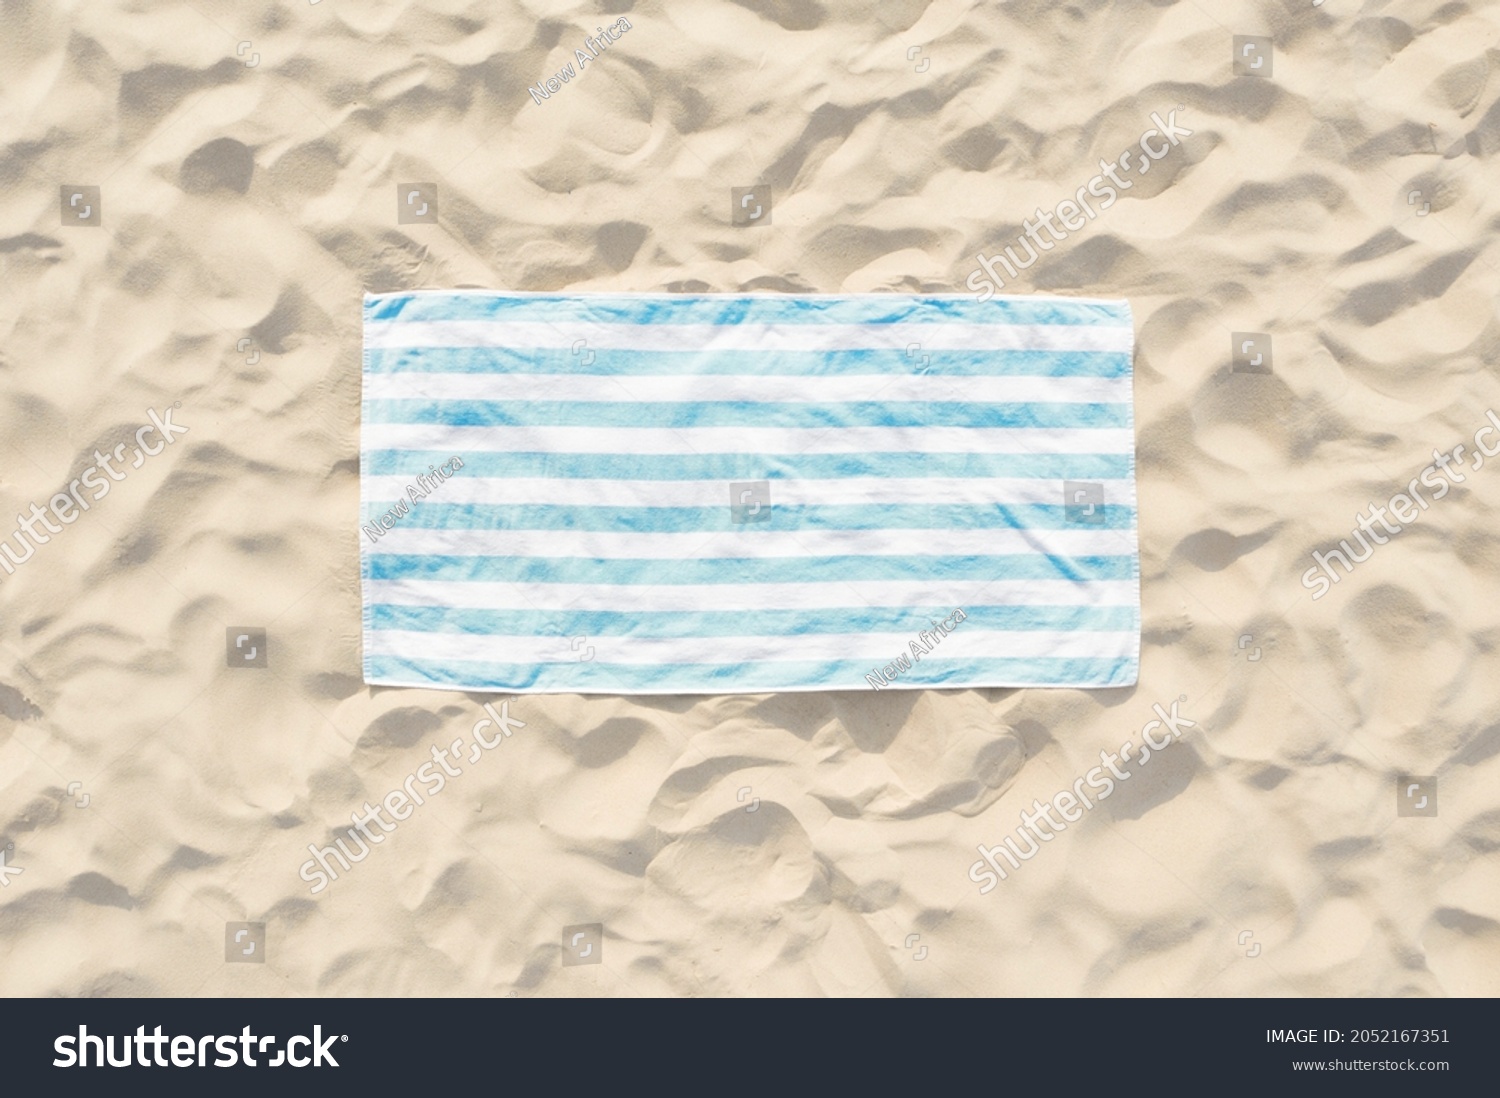 Striped beach towel on sand, aerial view #2052167351